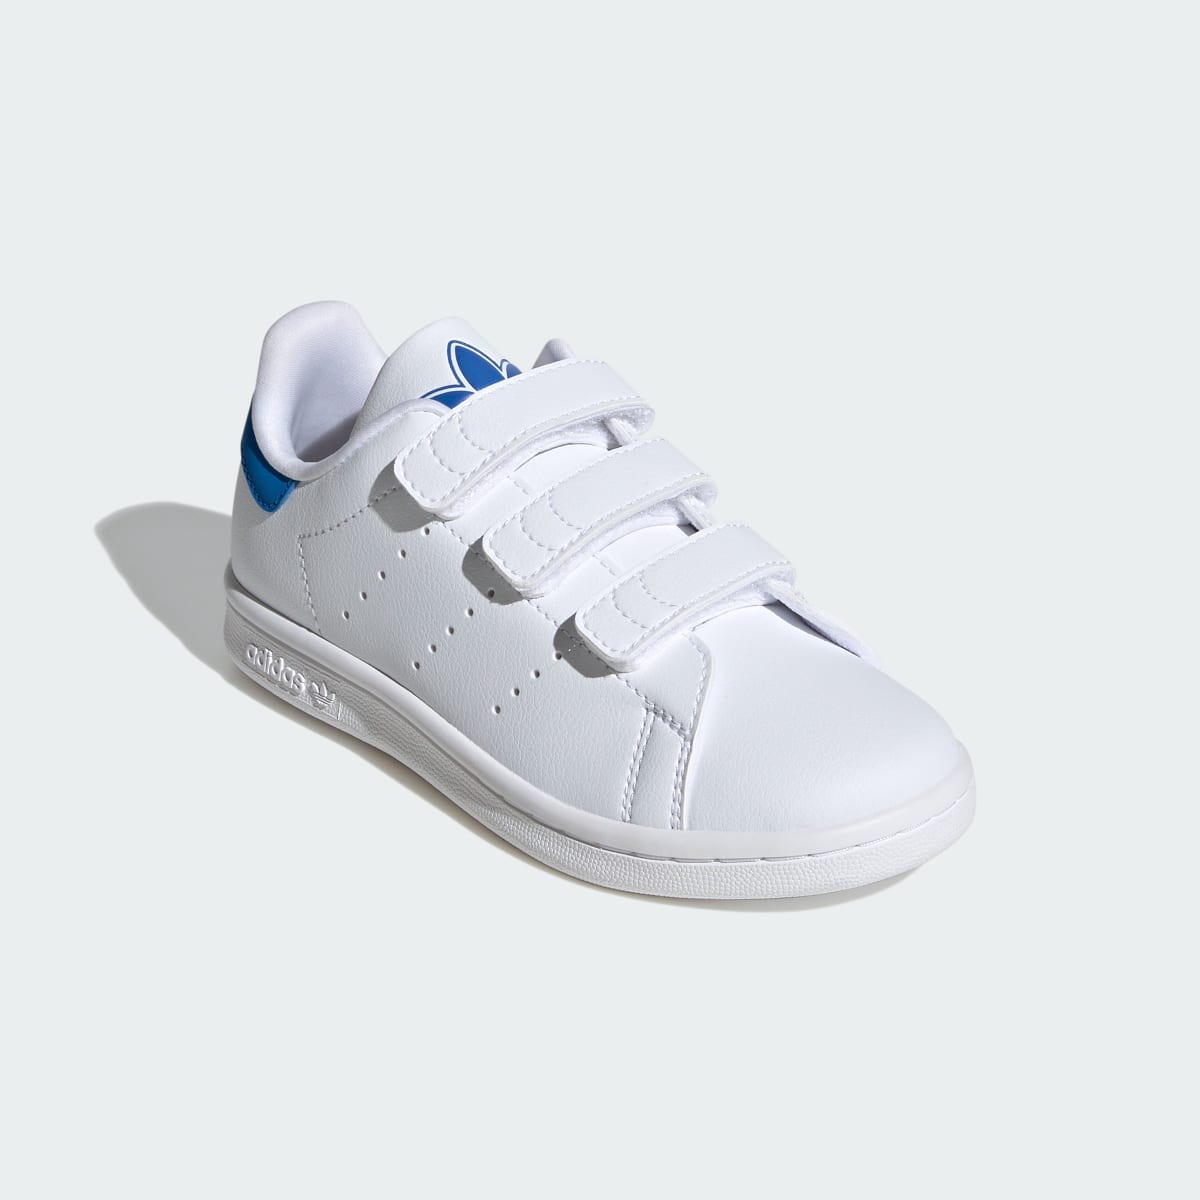 Adidas Stan Smith Comfort Closure Shoes Kids. 5